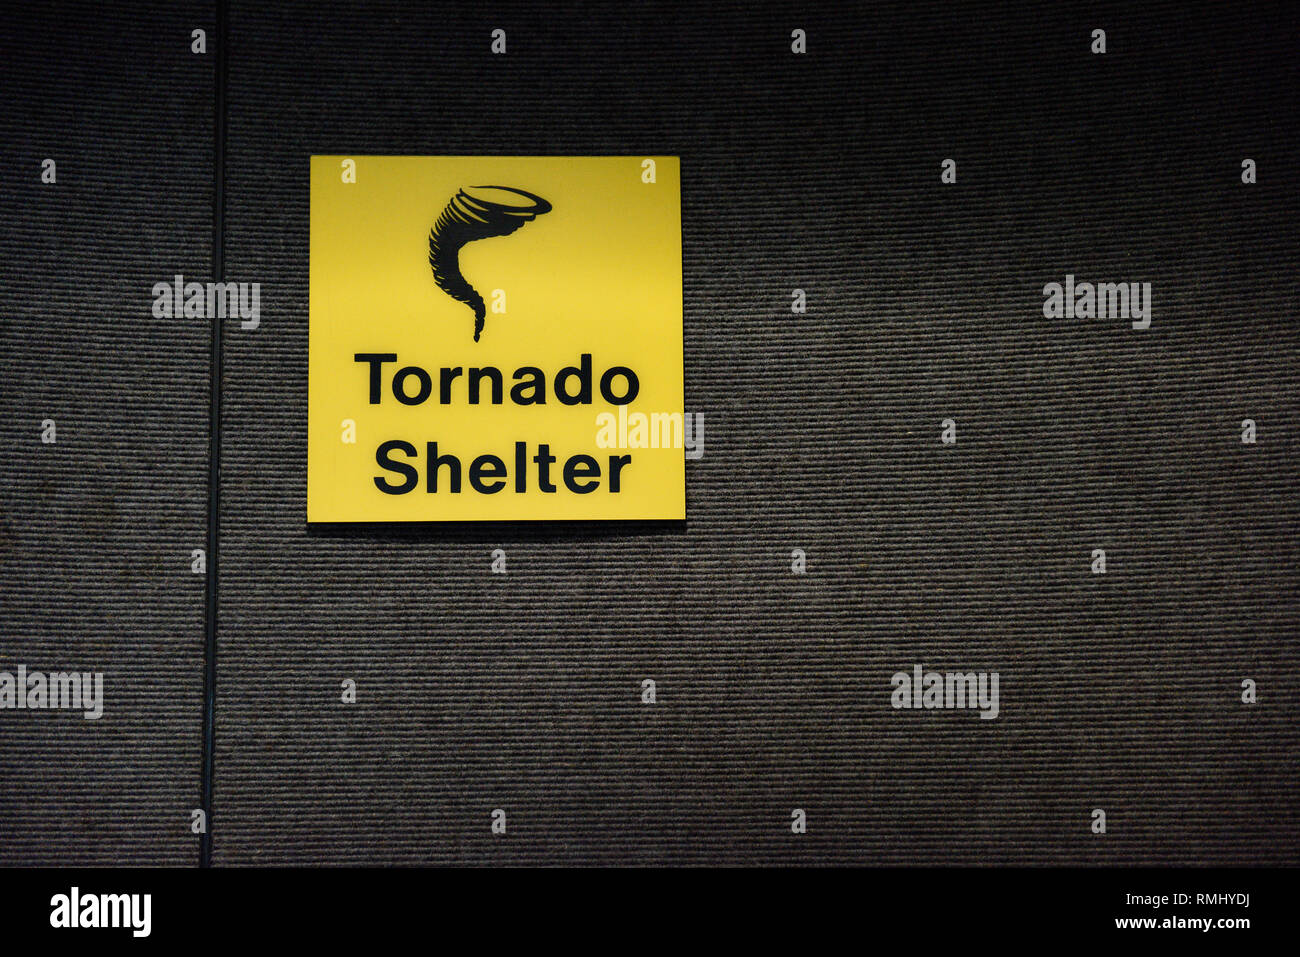 Tornado shelter yellow sign designating a safe room area, with tornado or twister icon. Stock Photo